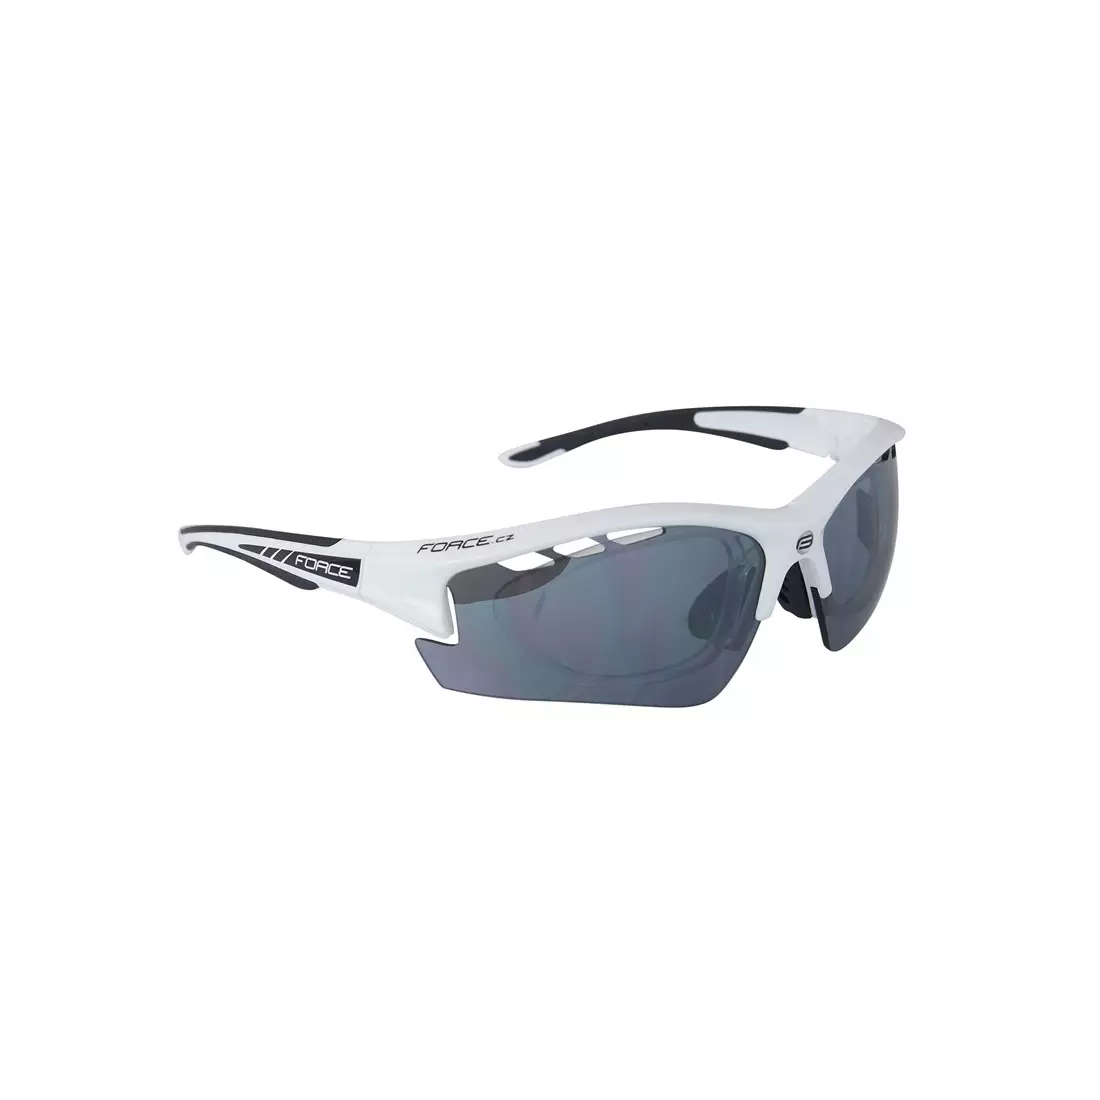 909222 FORCE RIDE PRO glasses with interchangeable lenses + correction white and black